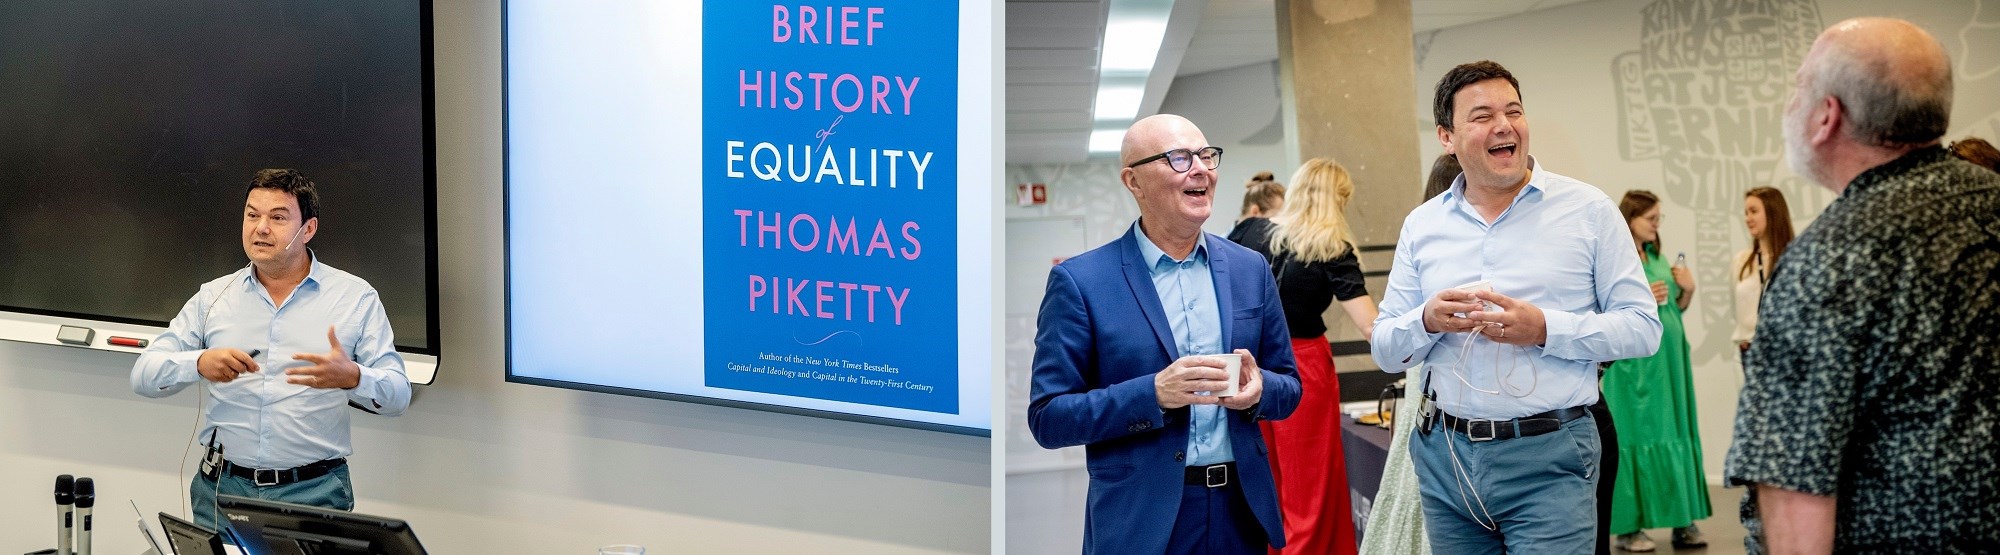 During his lecture, Piketty talked about his new book, “A Brief History of Equality”.  He and Salvanes mingled with the audience before the presentation started.